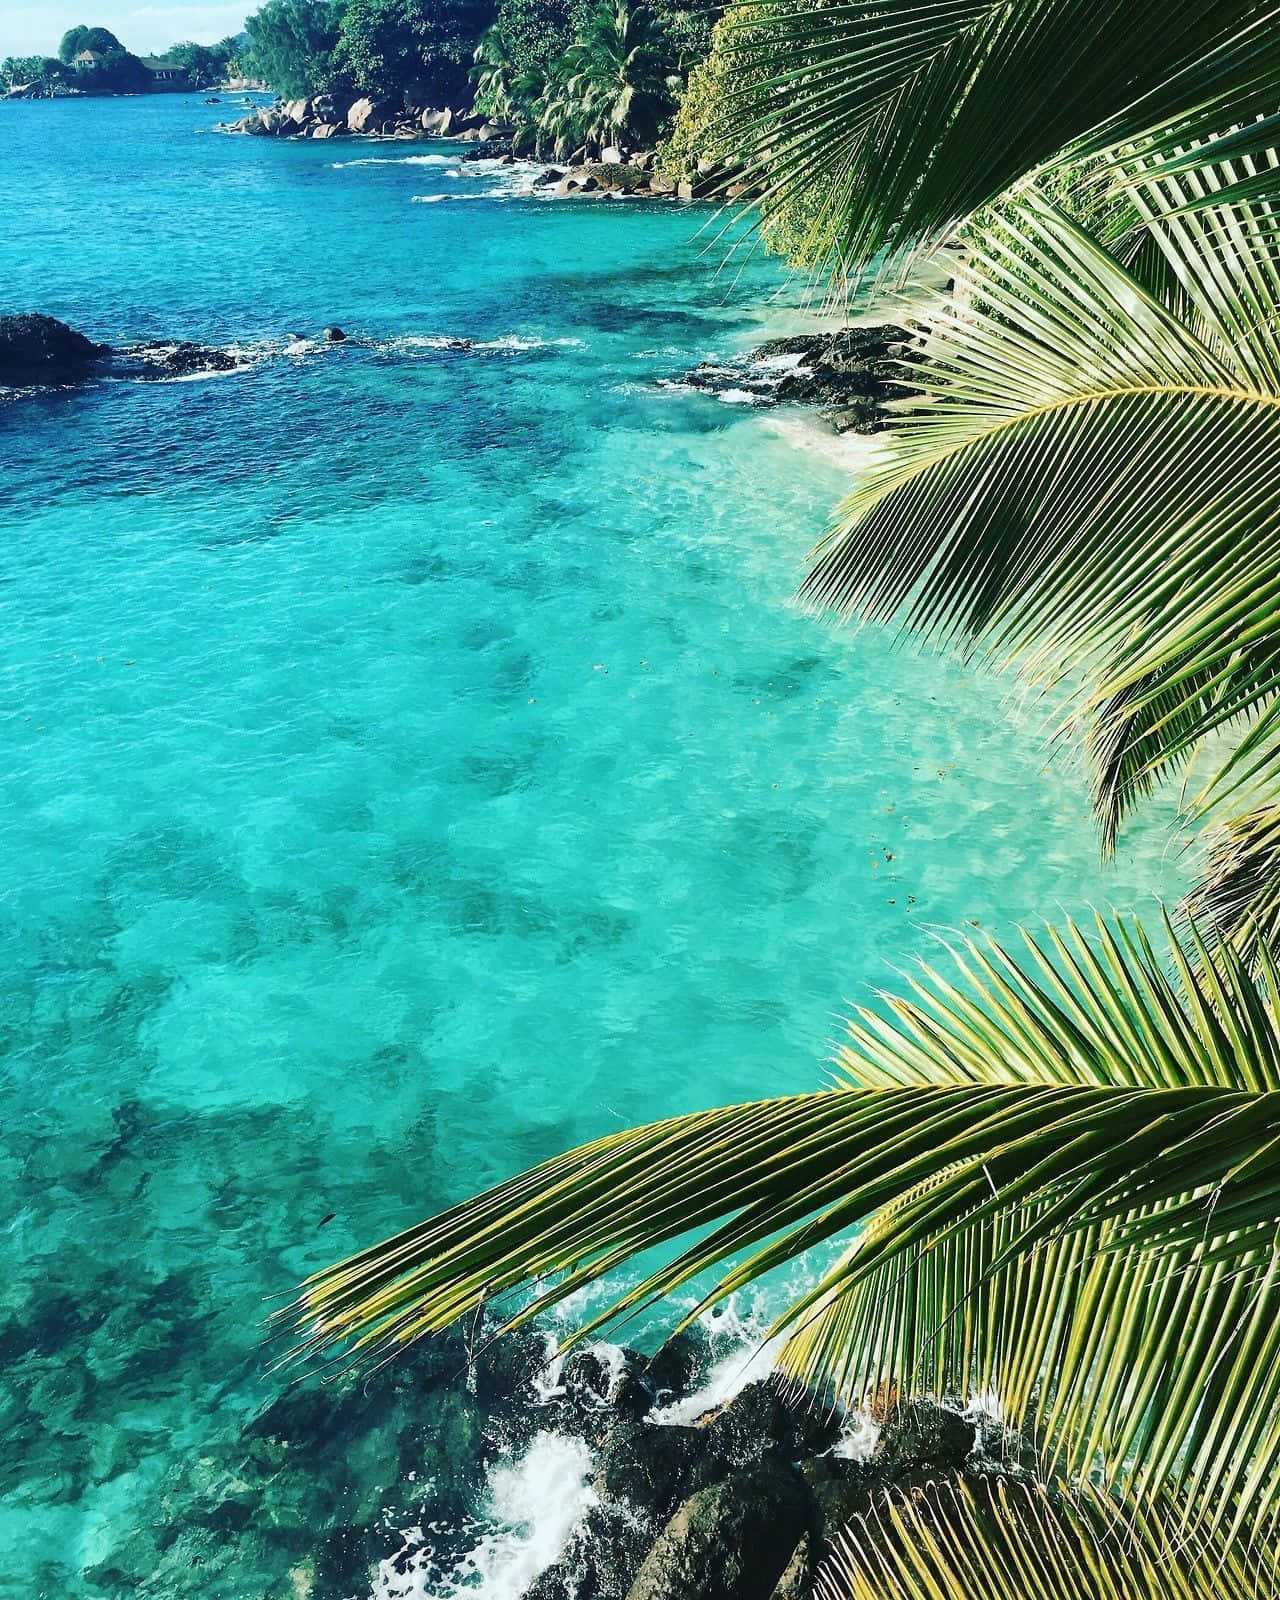 nathanheadeth on Twitter Tropical Sea Aesthetic Wallpapers Part 1  httpstcoOr2igYHGcg  Twitter